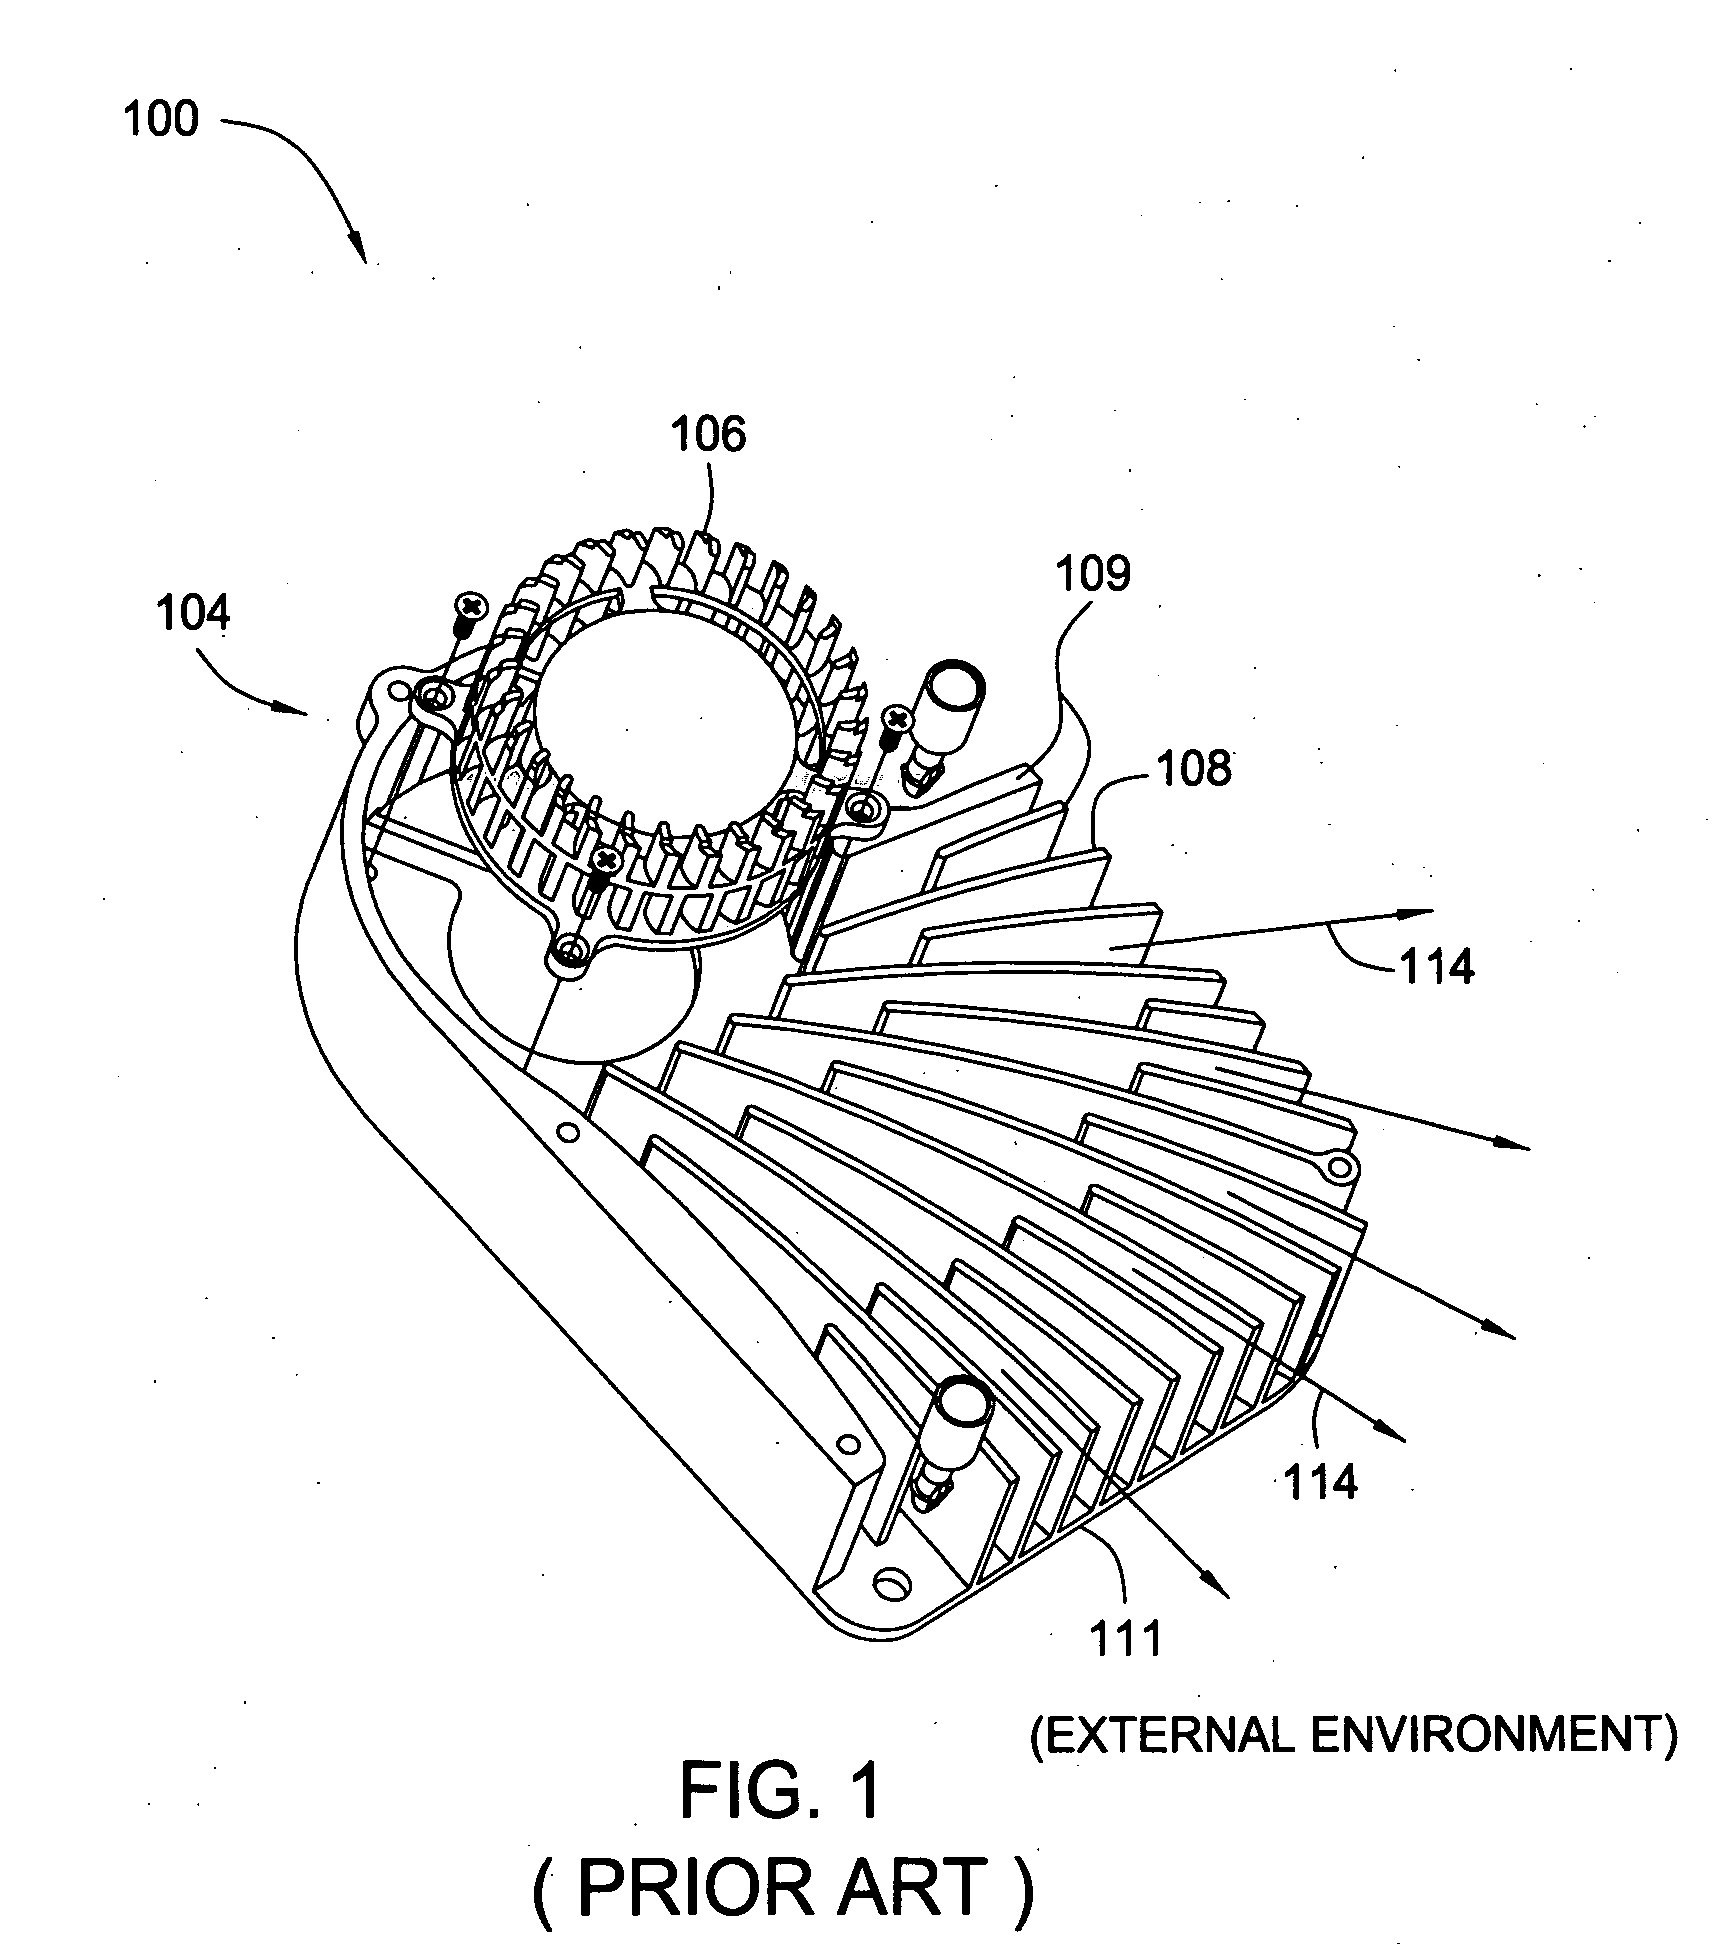 System for efficiently cooling a processor